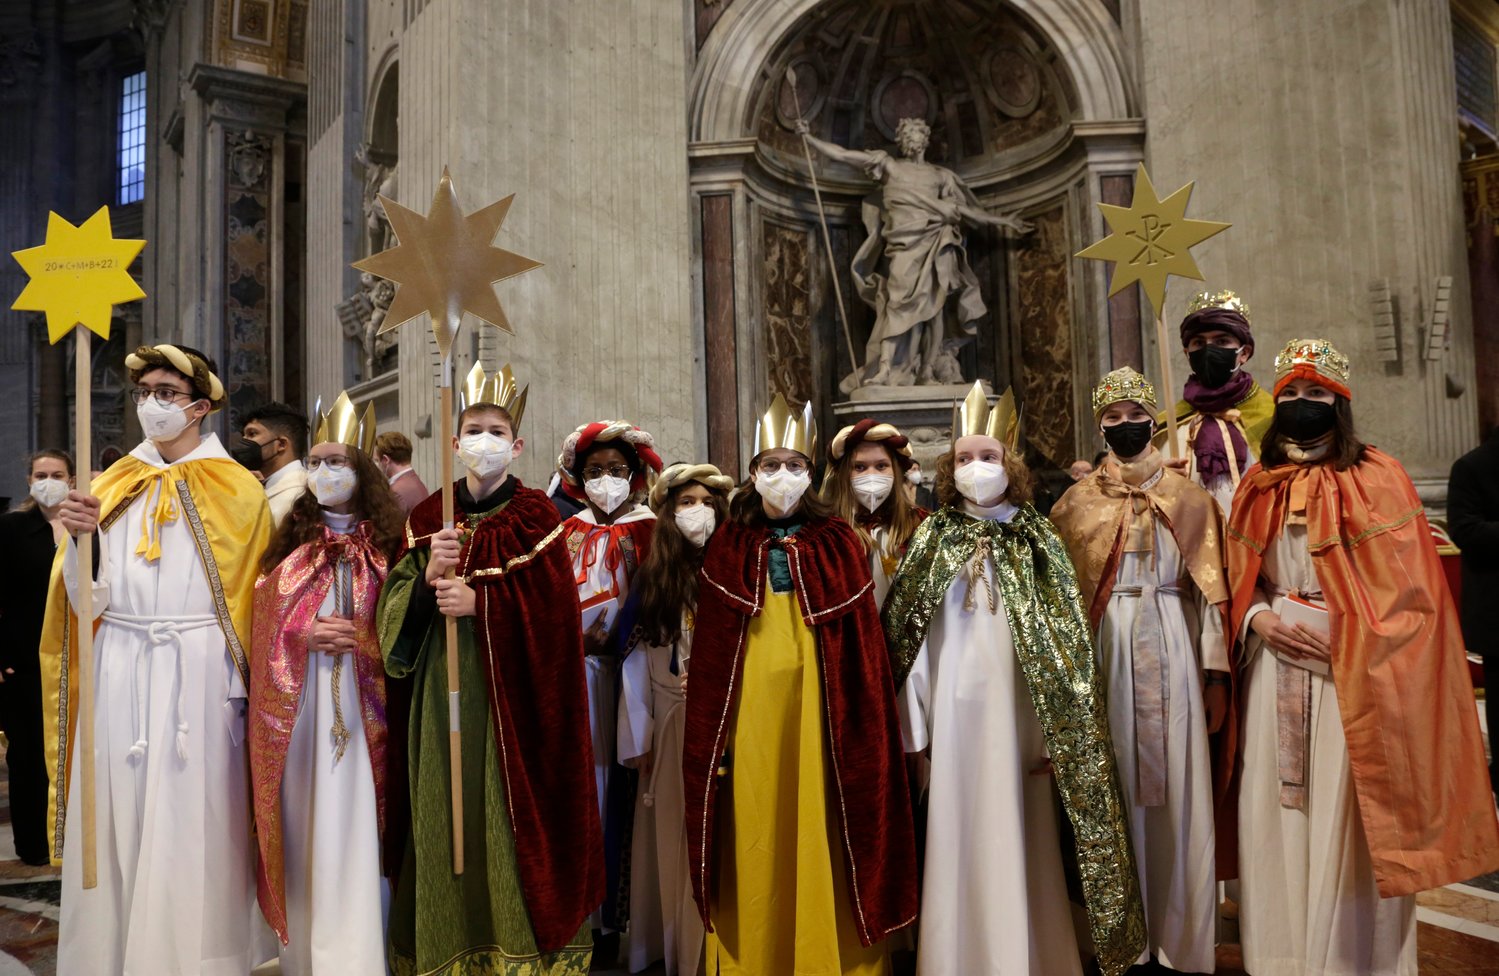 Young people dressed as the Magi are pictured after attending Pope Francis’ celebration of Mass on the feast of Mary, Mother of God, at the Vatican Jan. 1. German, Italian and Swiss young people, called “sternsingers,” carol and raise money for charity between Christmas and Epiphany each year.